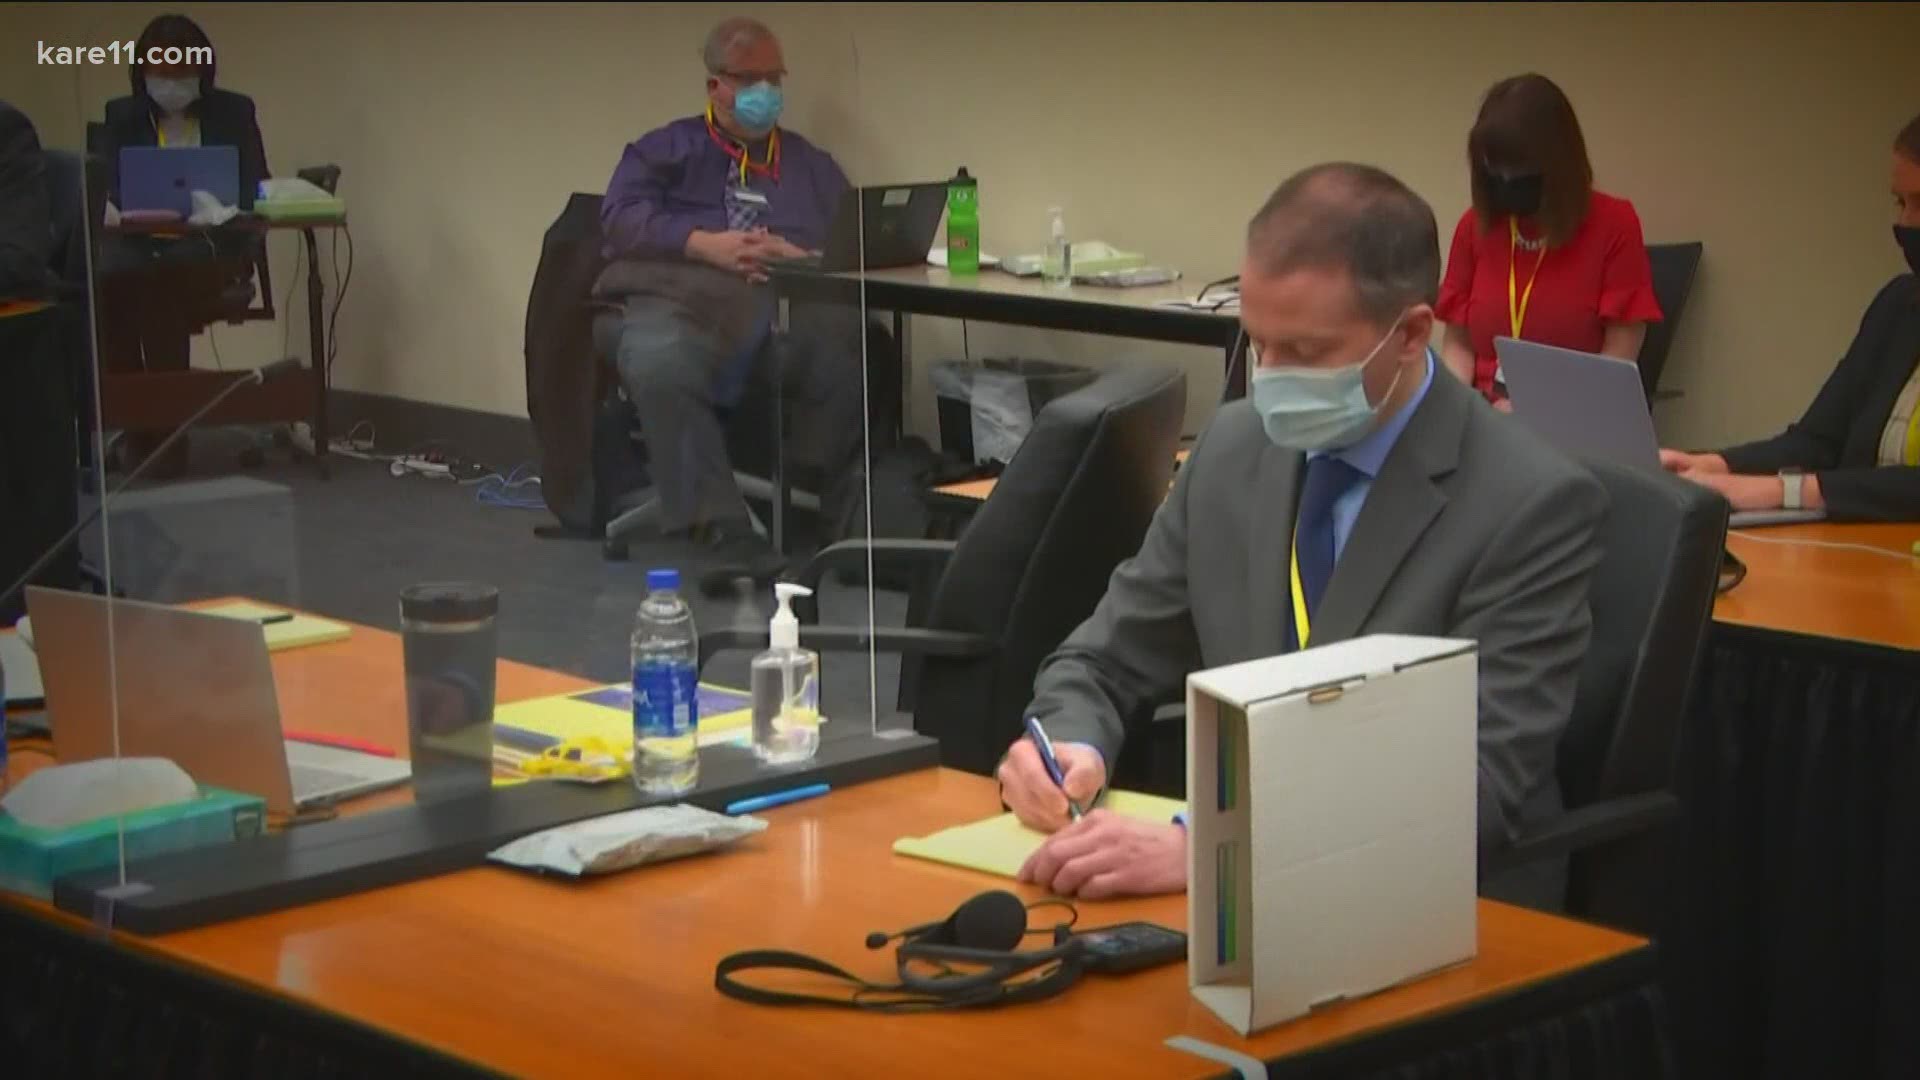 If you’re among those who didn’t catch the most important moments in court, KARE 11’s got you covered.